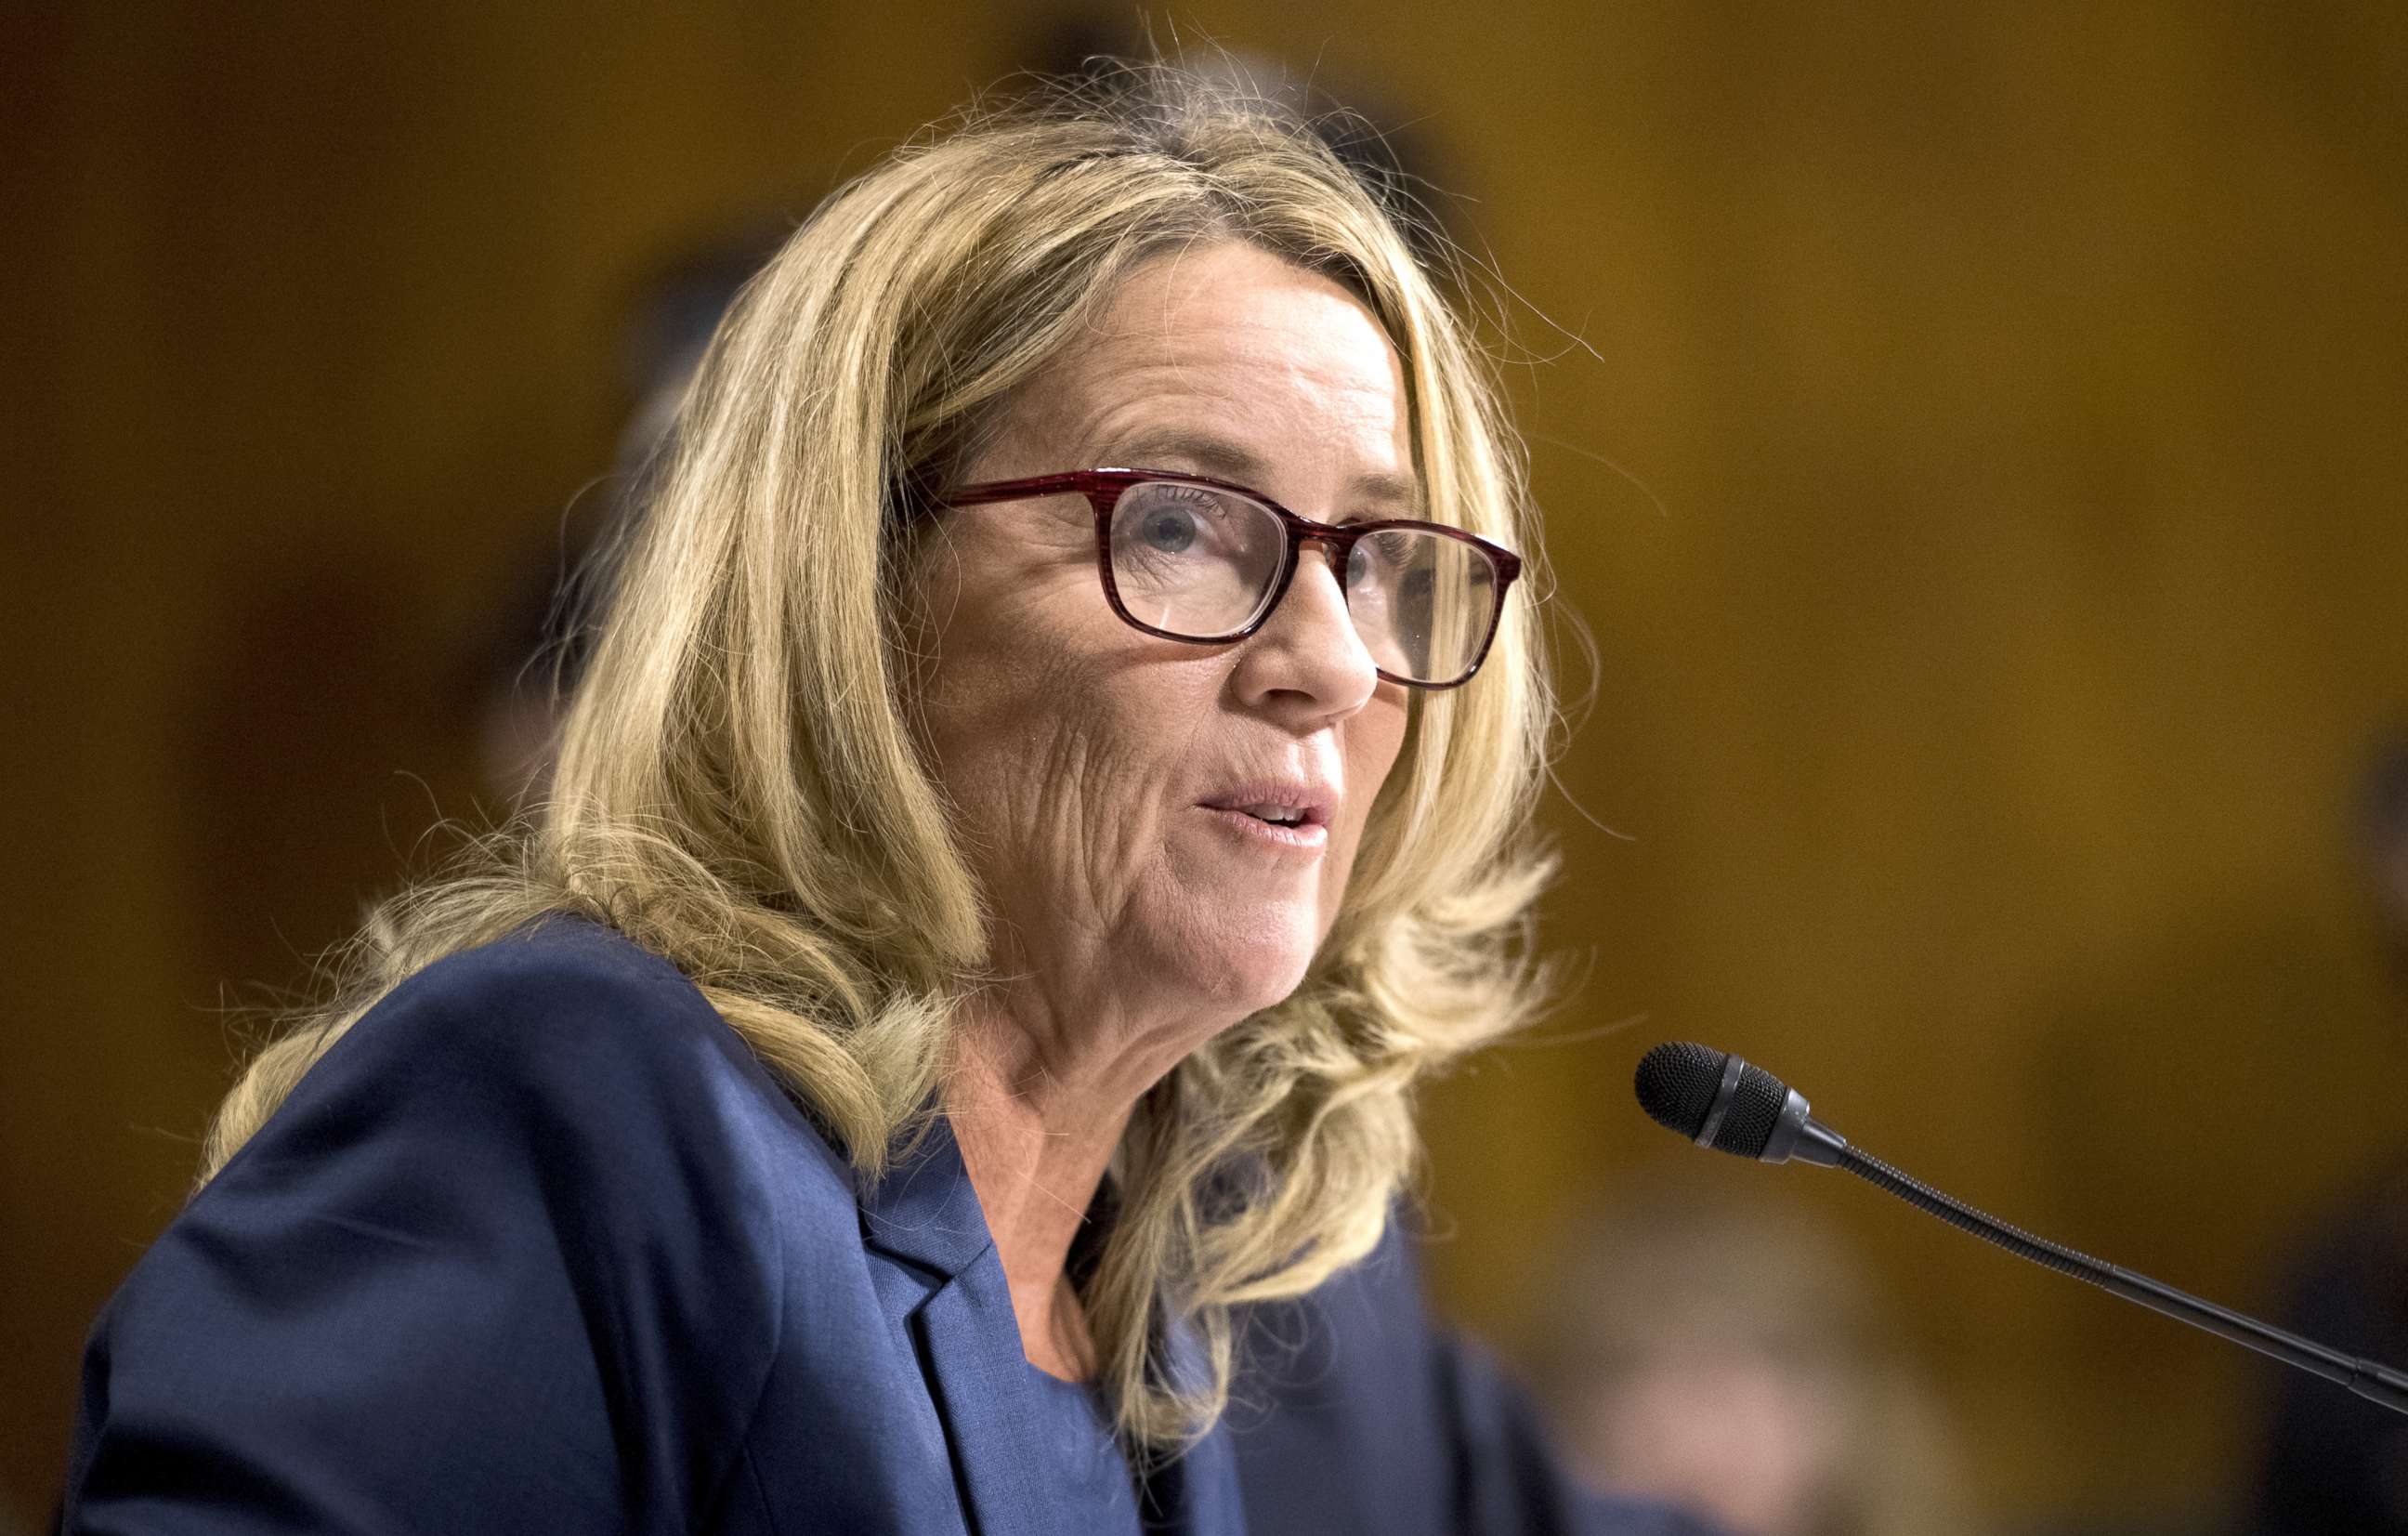 PHOTO: Christine Blasey Ford testifies during the Senate Judiciary Committee hearing on the nomination of Brett M. Kavanaugh to be an associate justice of the Supreme Court of the U.S., on Capitol Hill, Sept. 27, 2018, in Washington, DC.